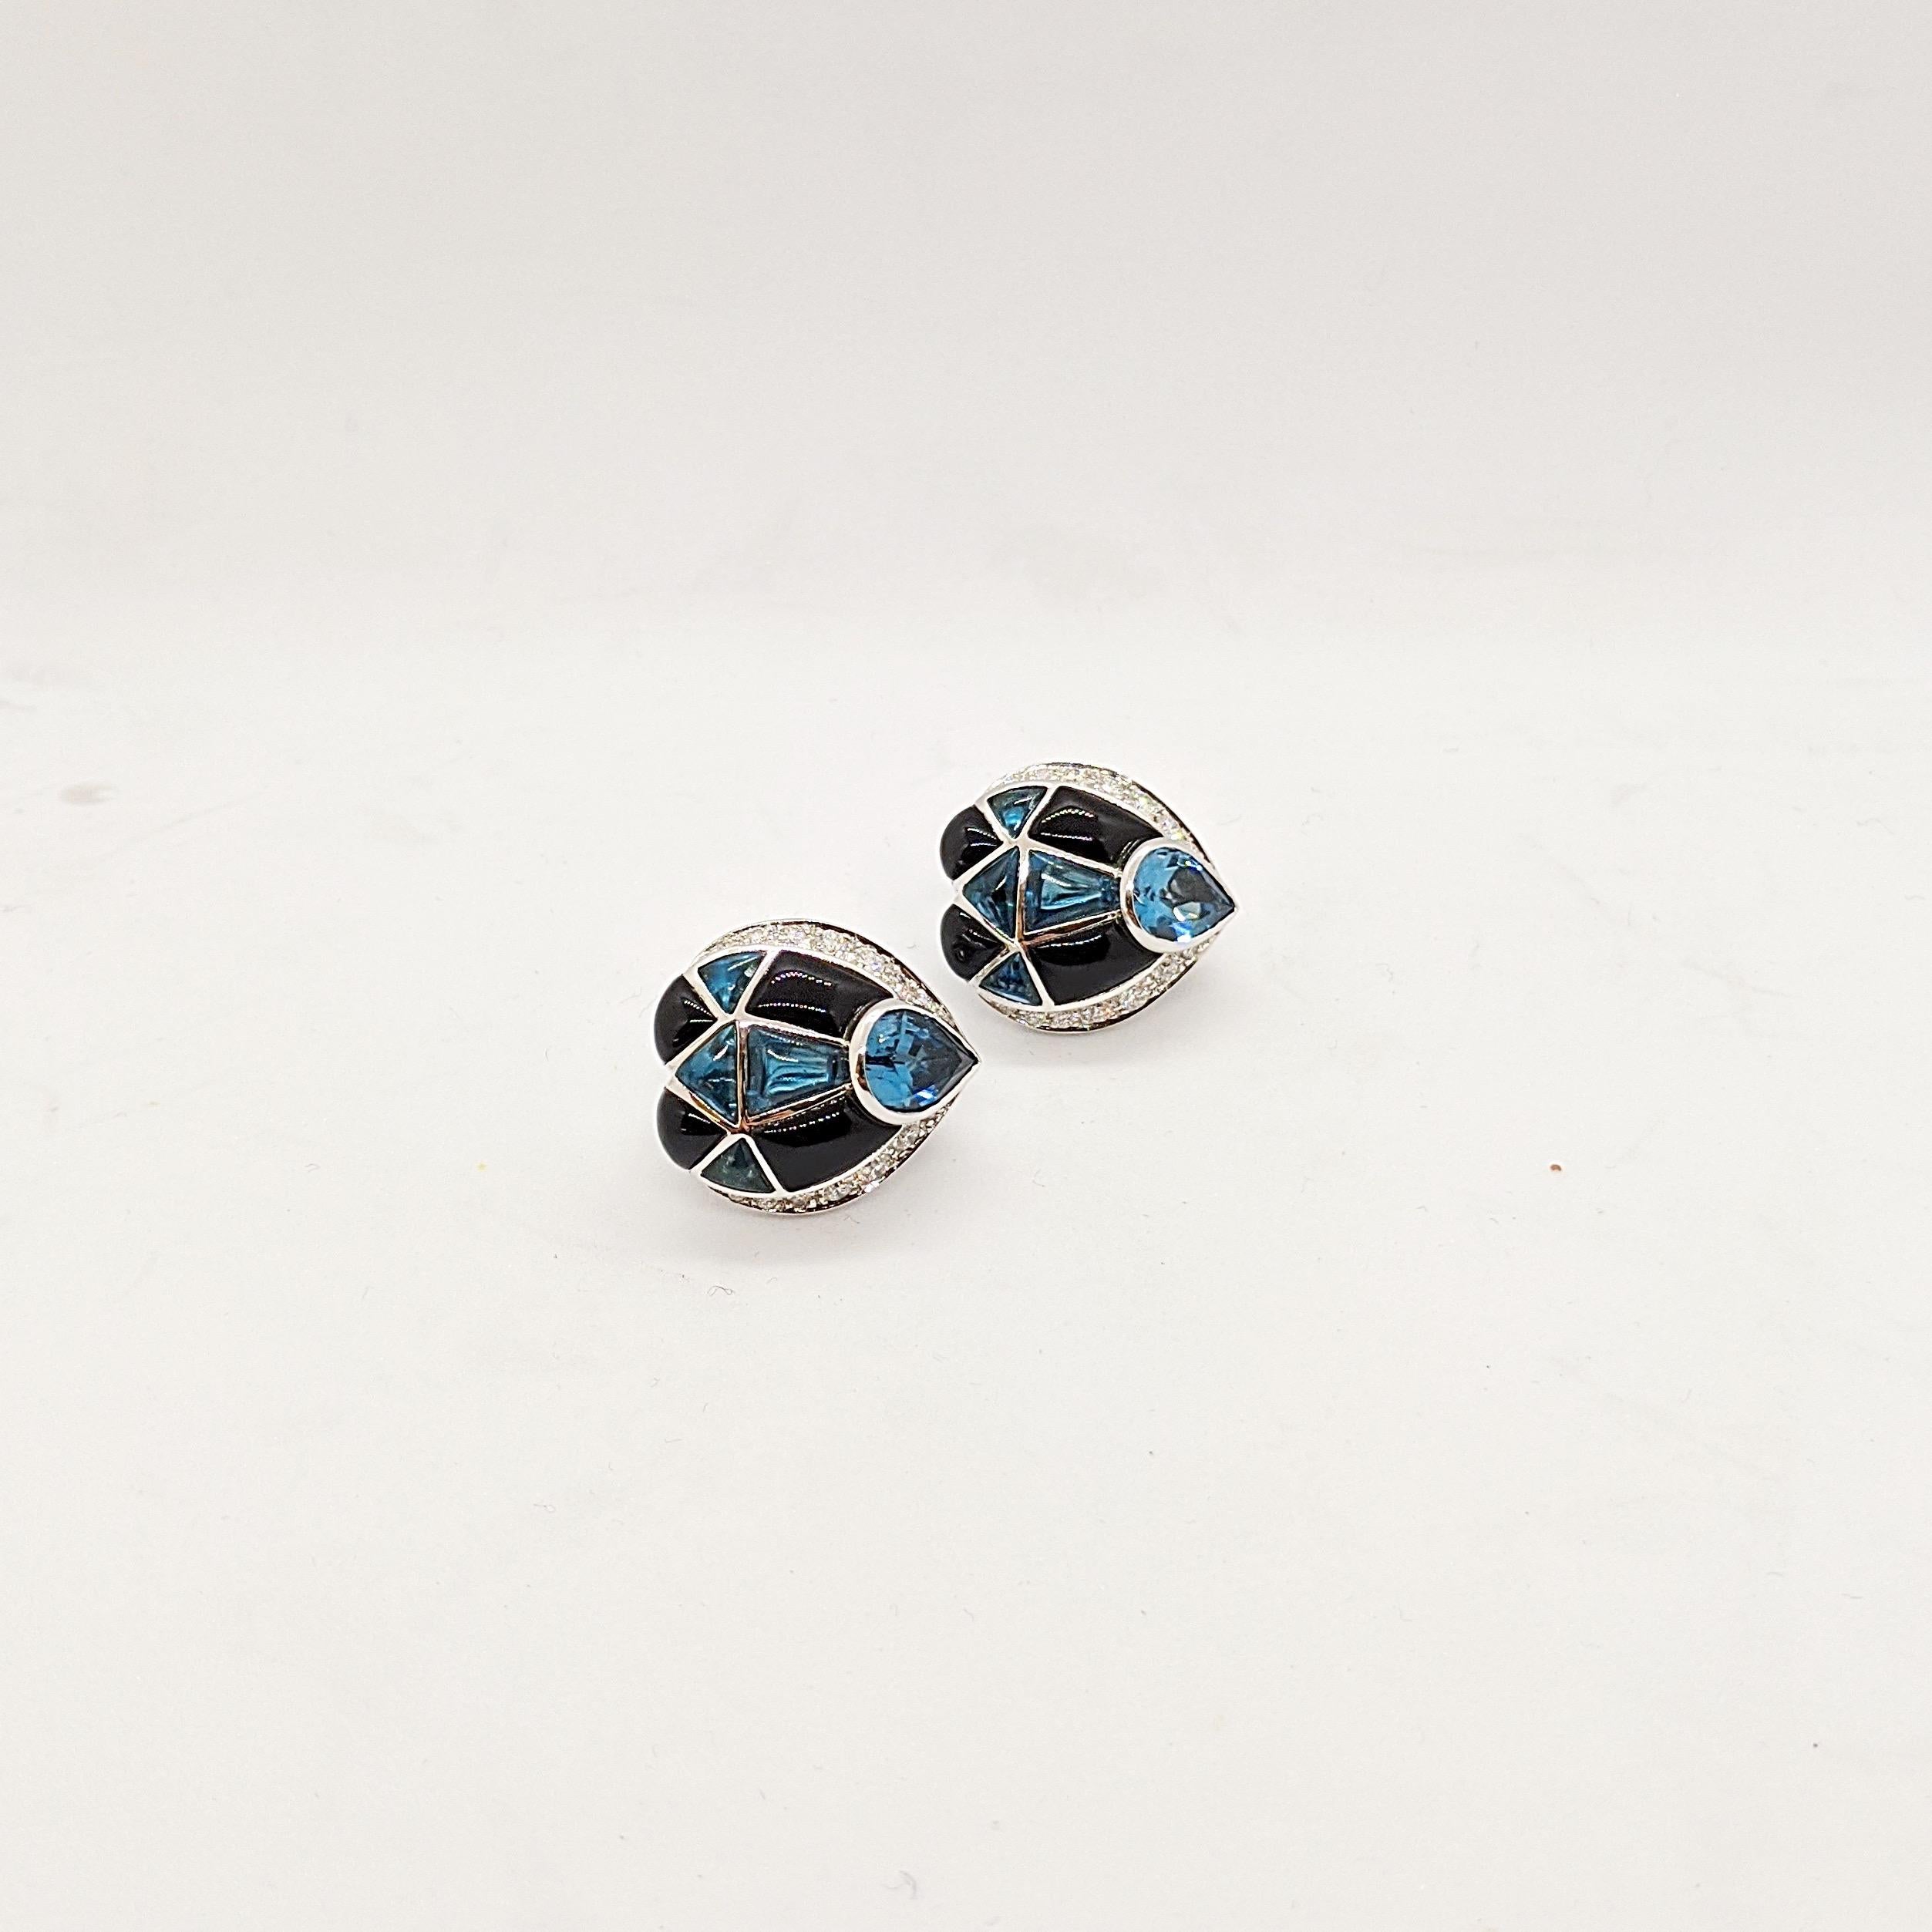 These earrings were designed by Oro Trend of Italy. The 18 karat white gold teardrop shaped earrings are set with Diamonds, Blue Topaz and Black Onyx. They have a french clip back with a fold down post making them suitable for pierced and non